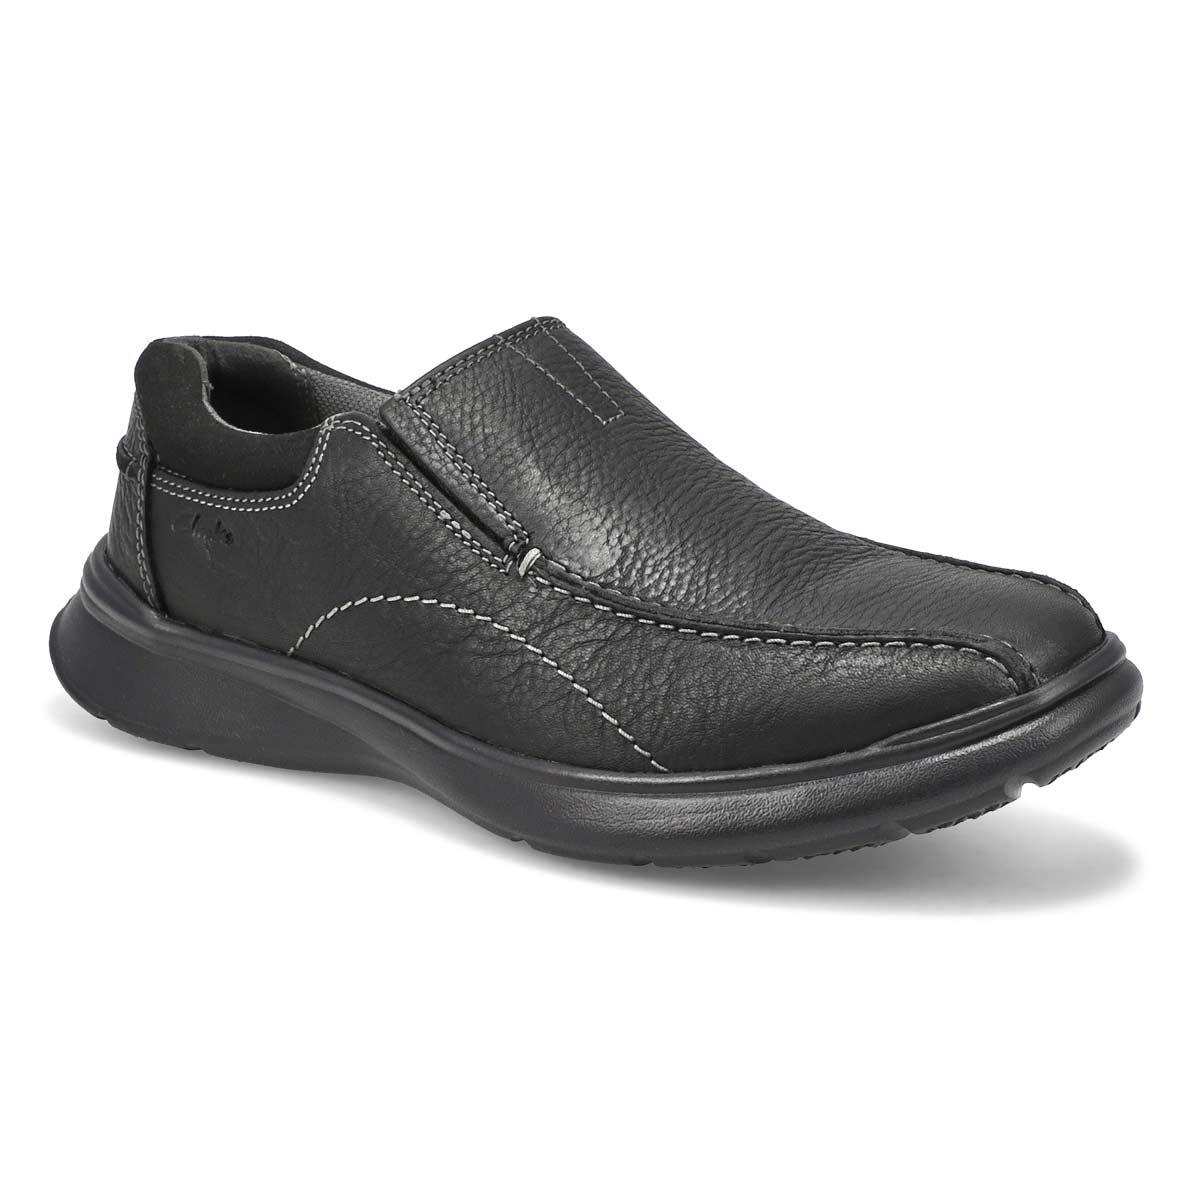 clarks mens work shoes